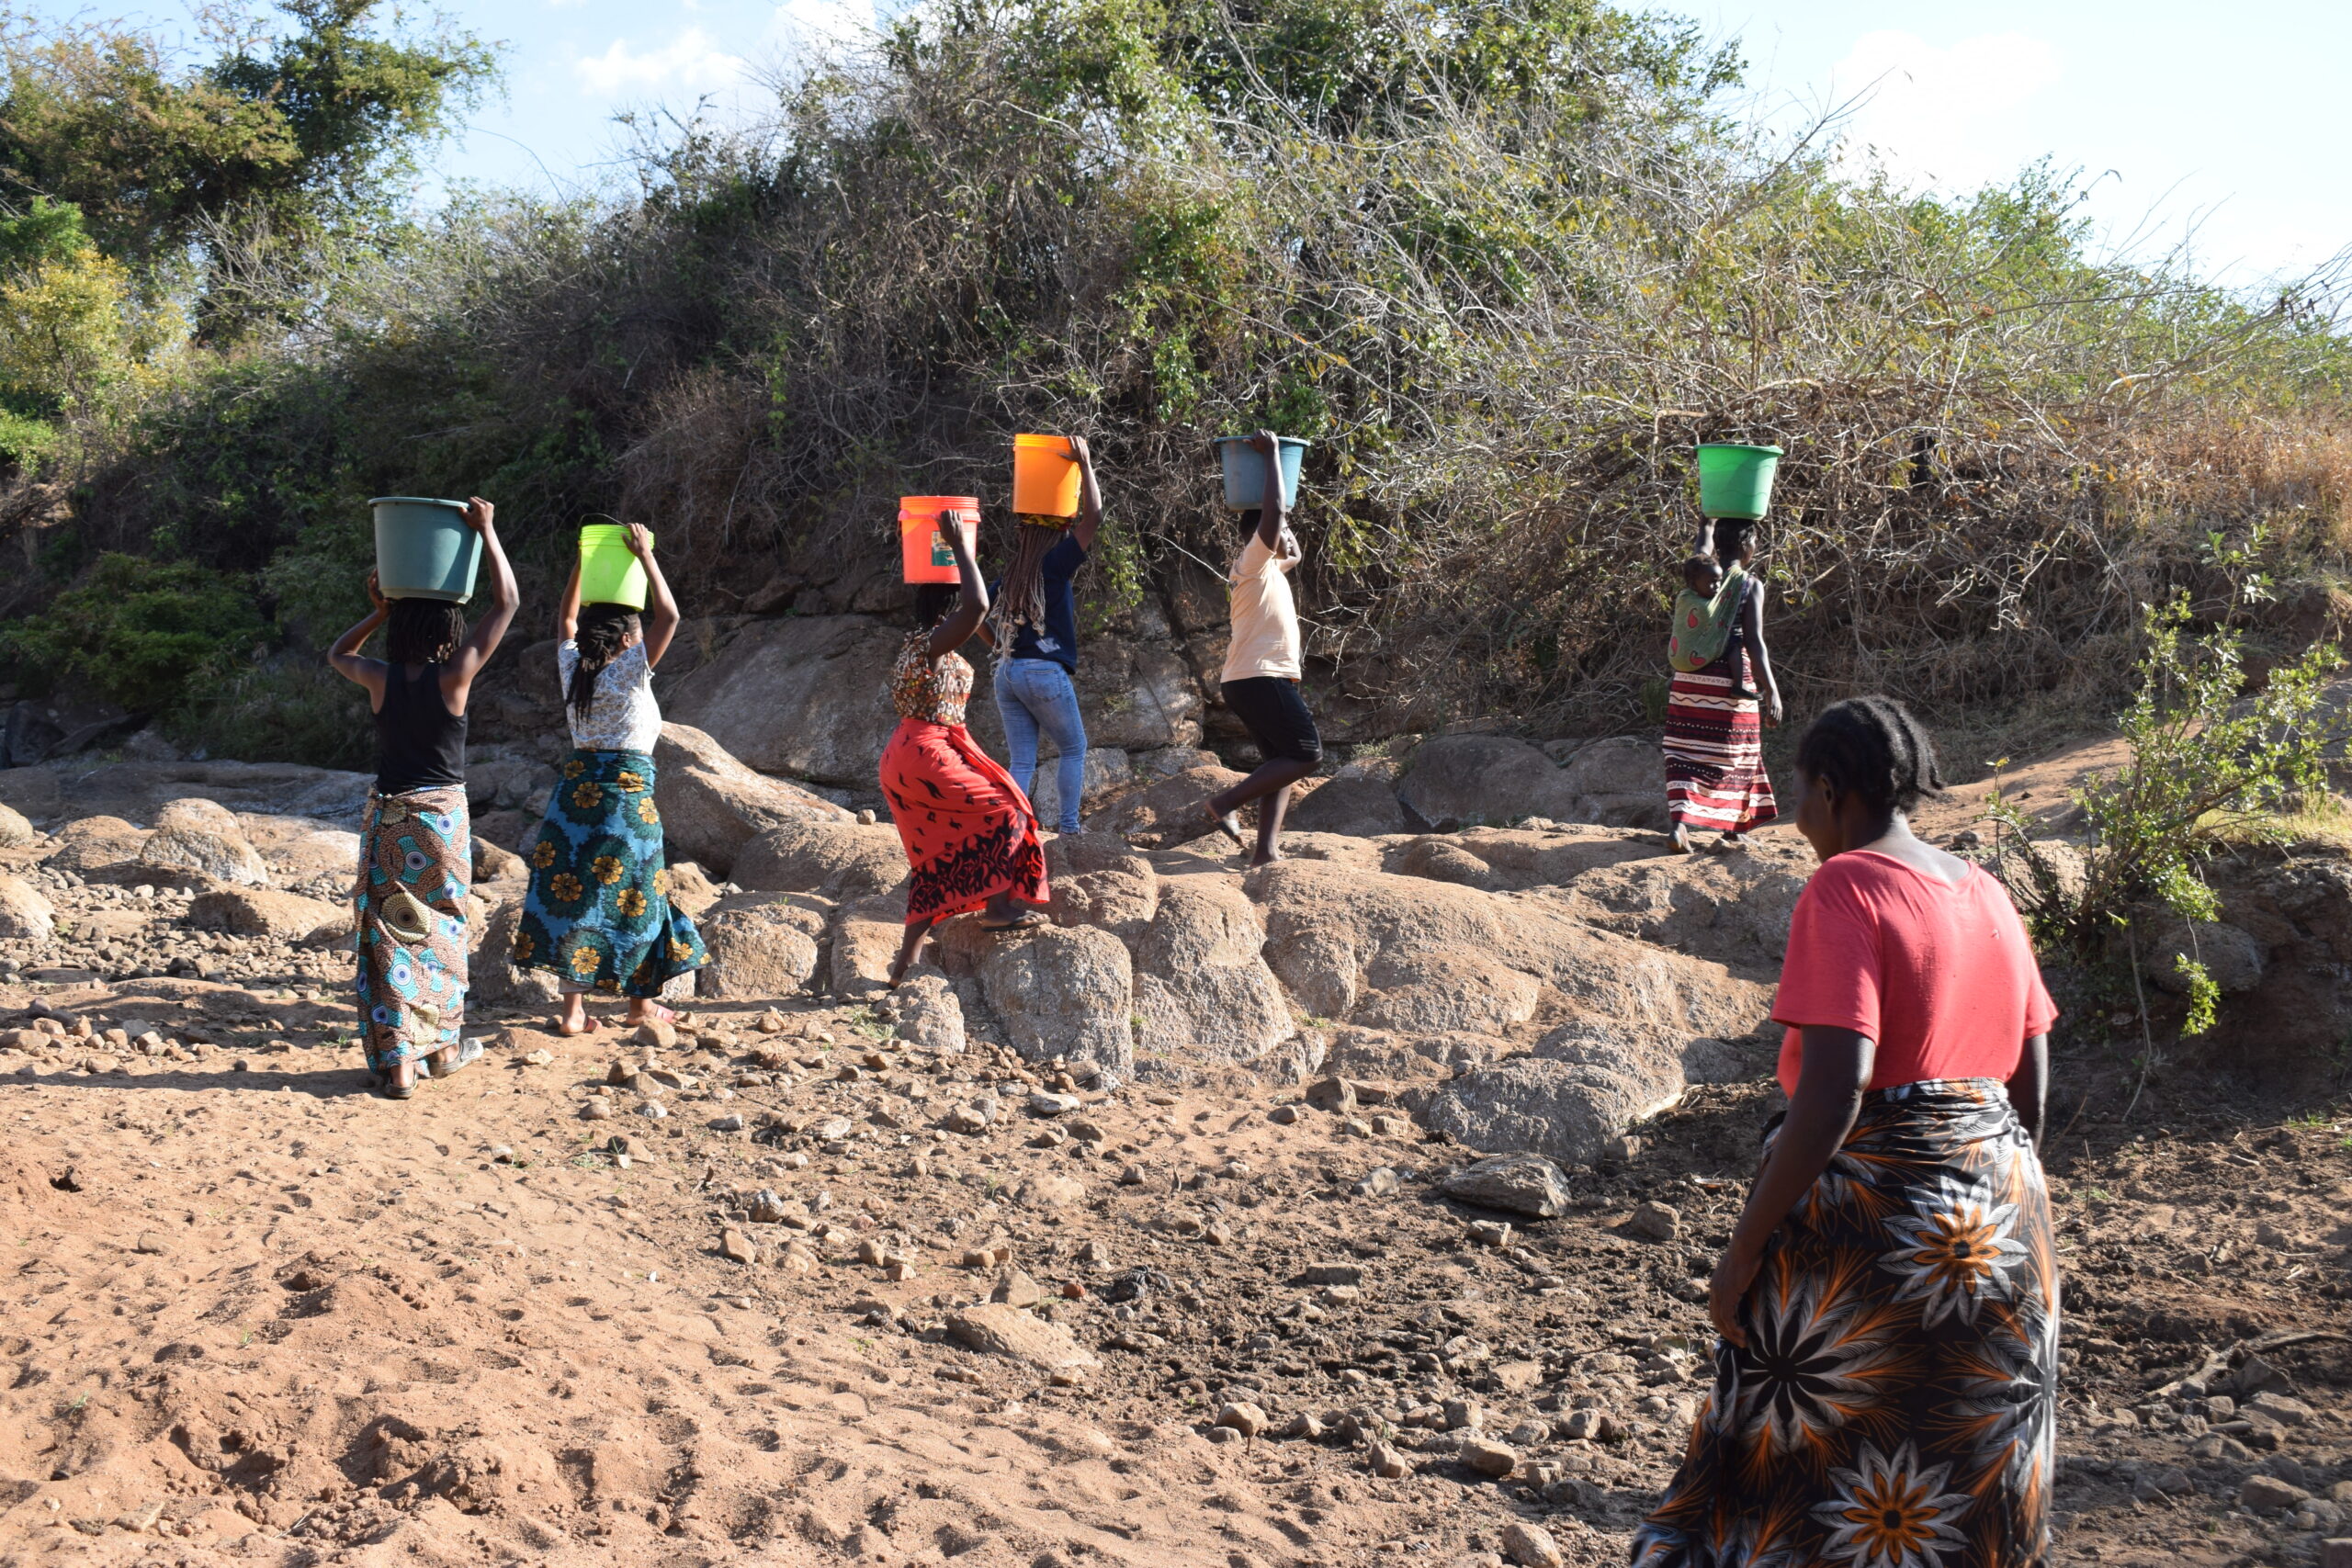 women collecting water from river in Thiba village, Malawi. they walk with buckets carried over their heads.